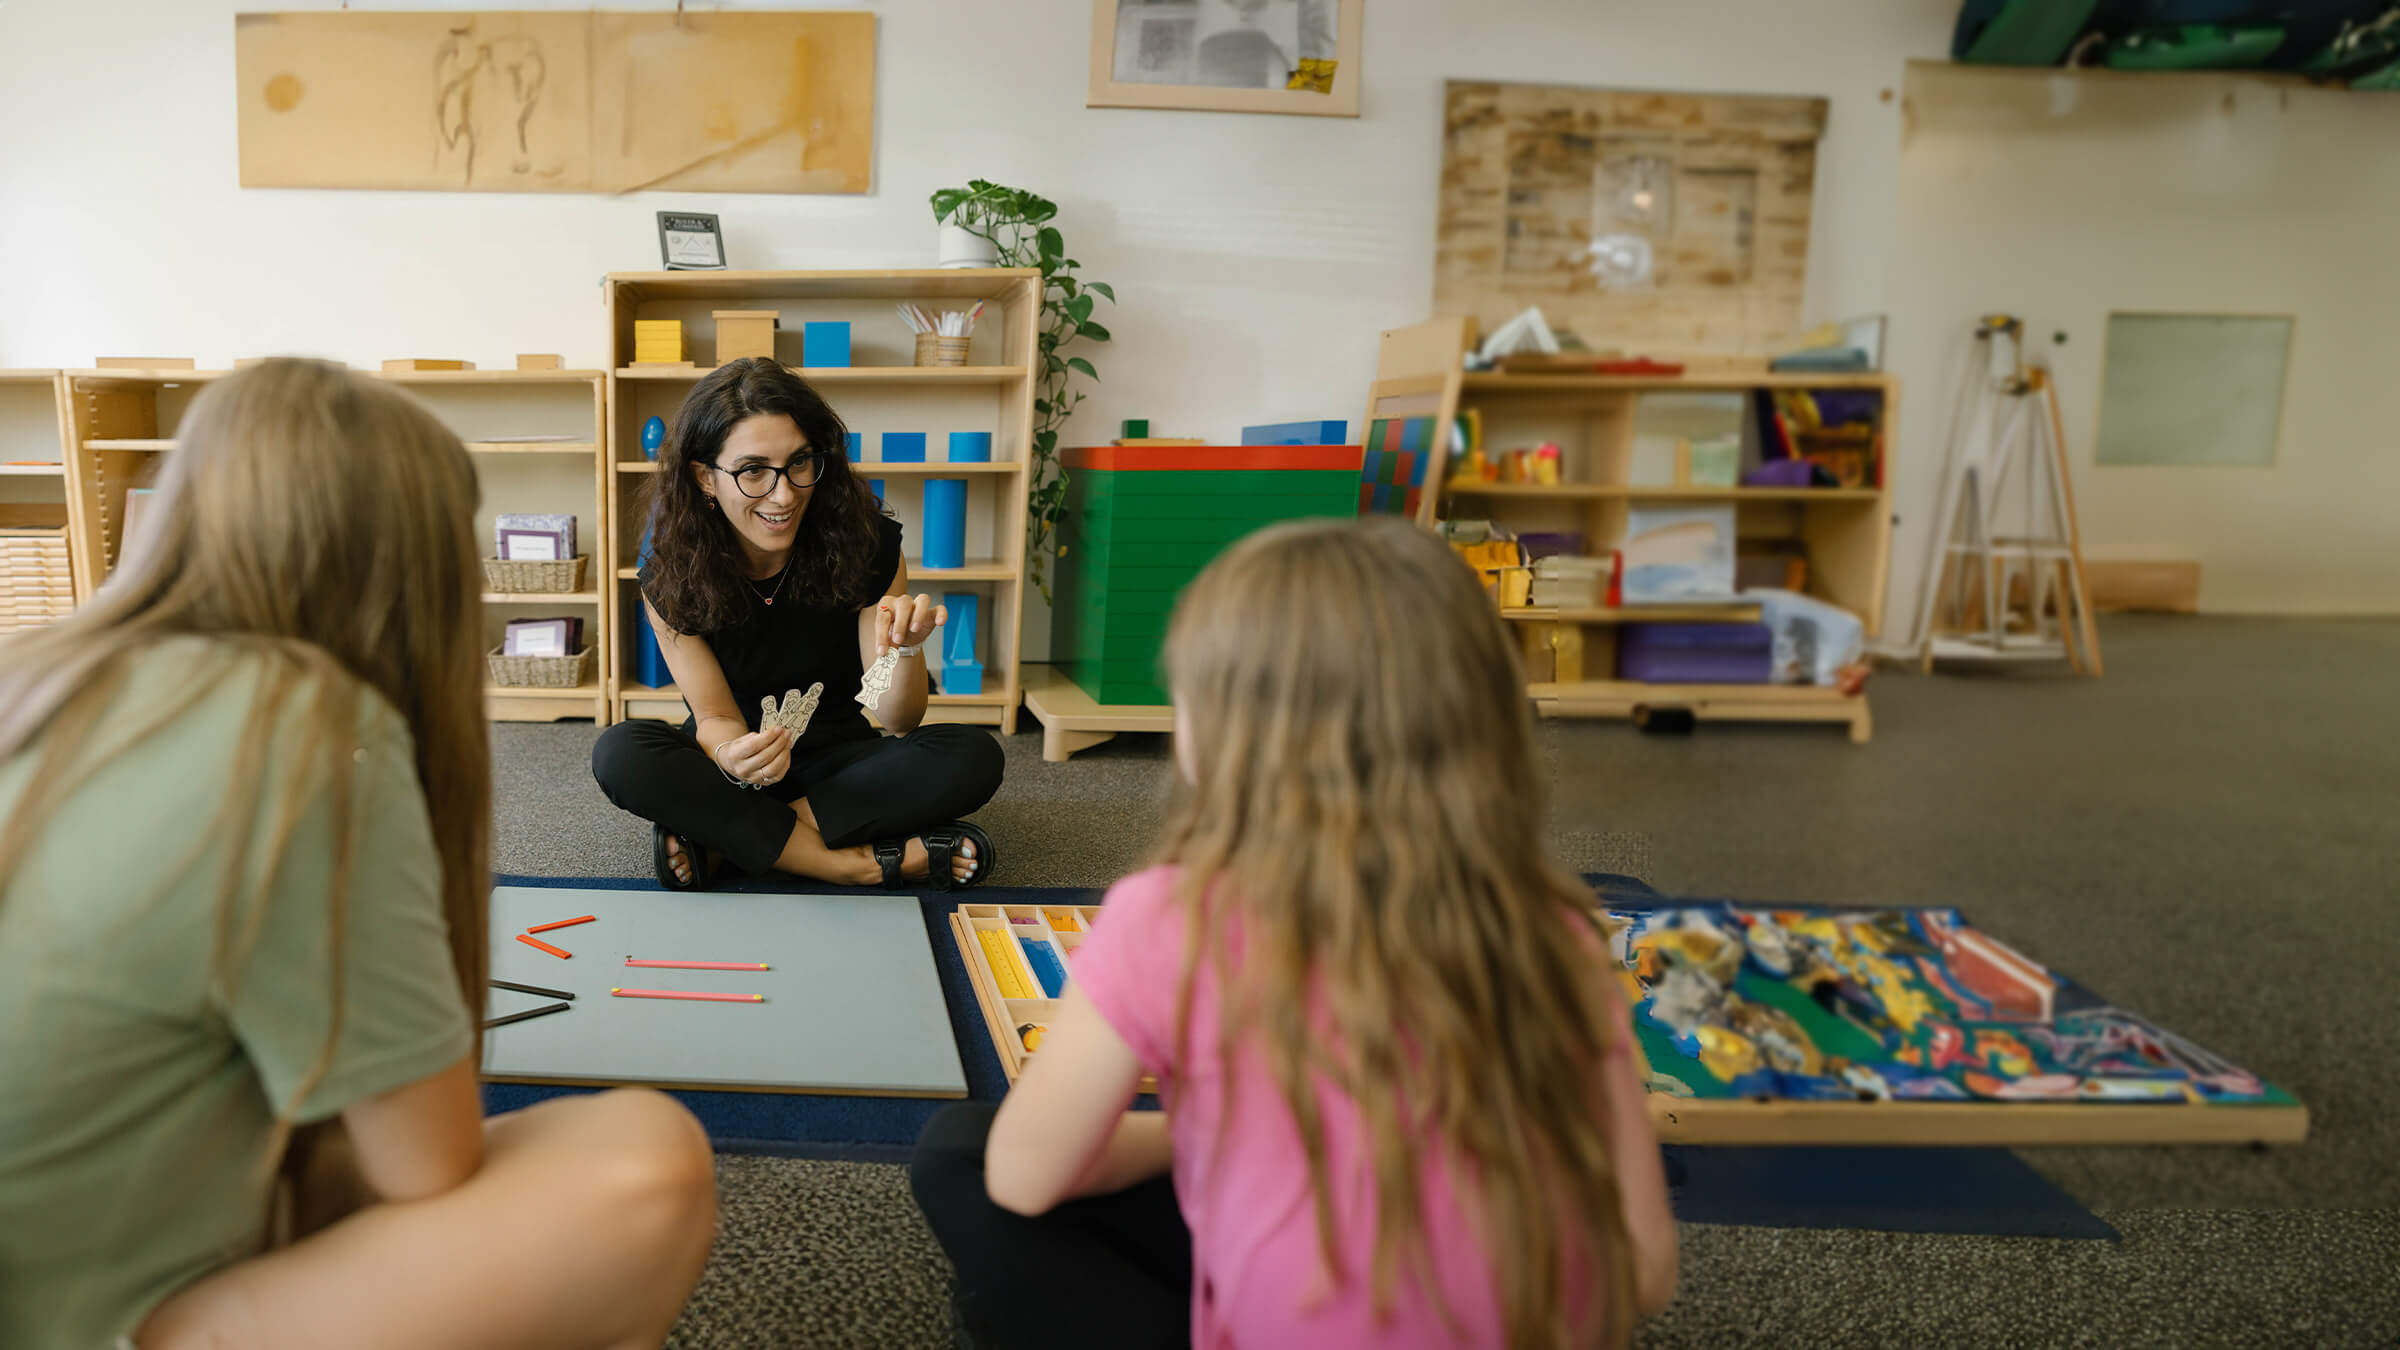 A teacher sits across from two elementary students on the floor and engages them with cutout objects.